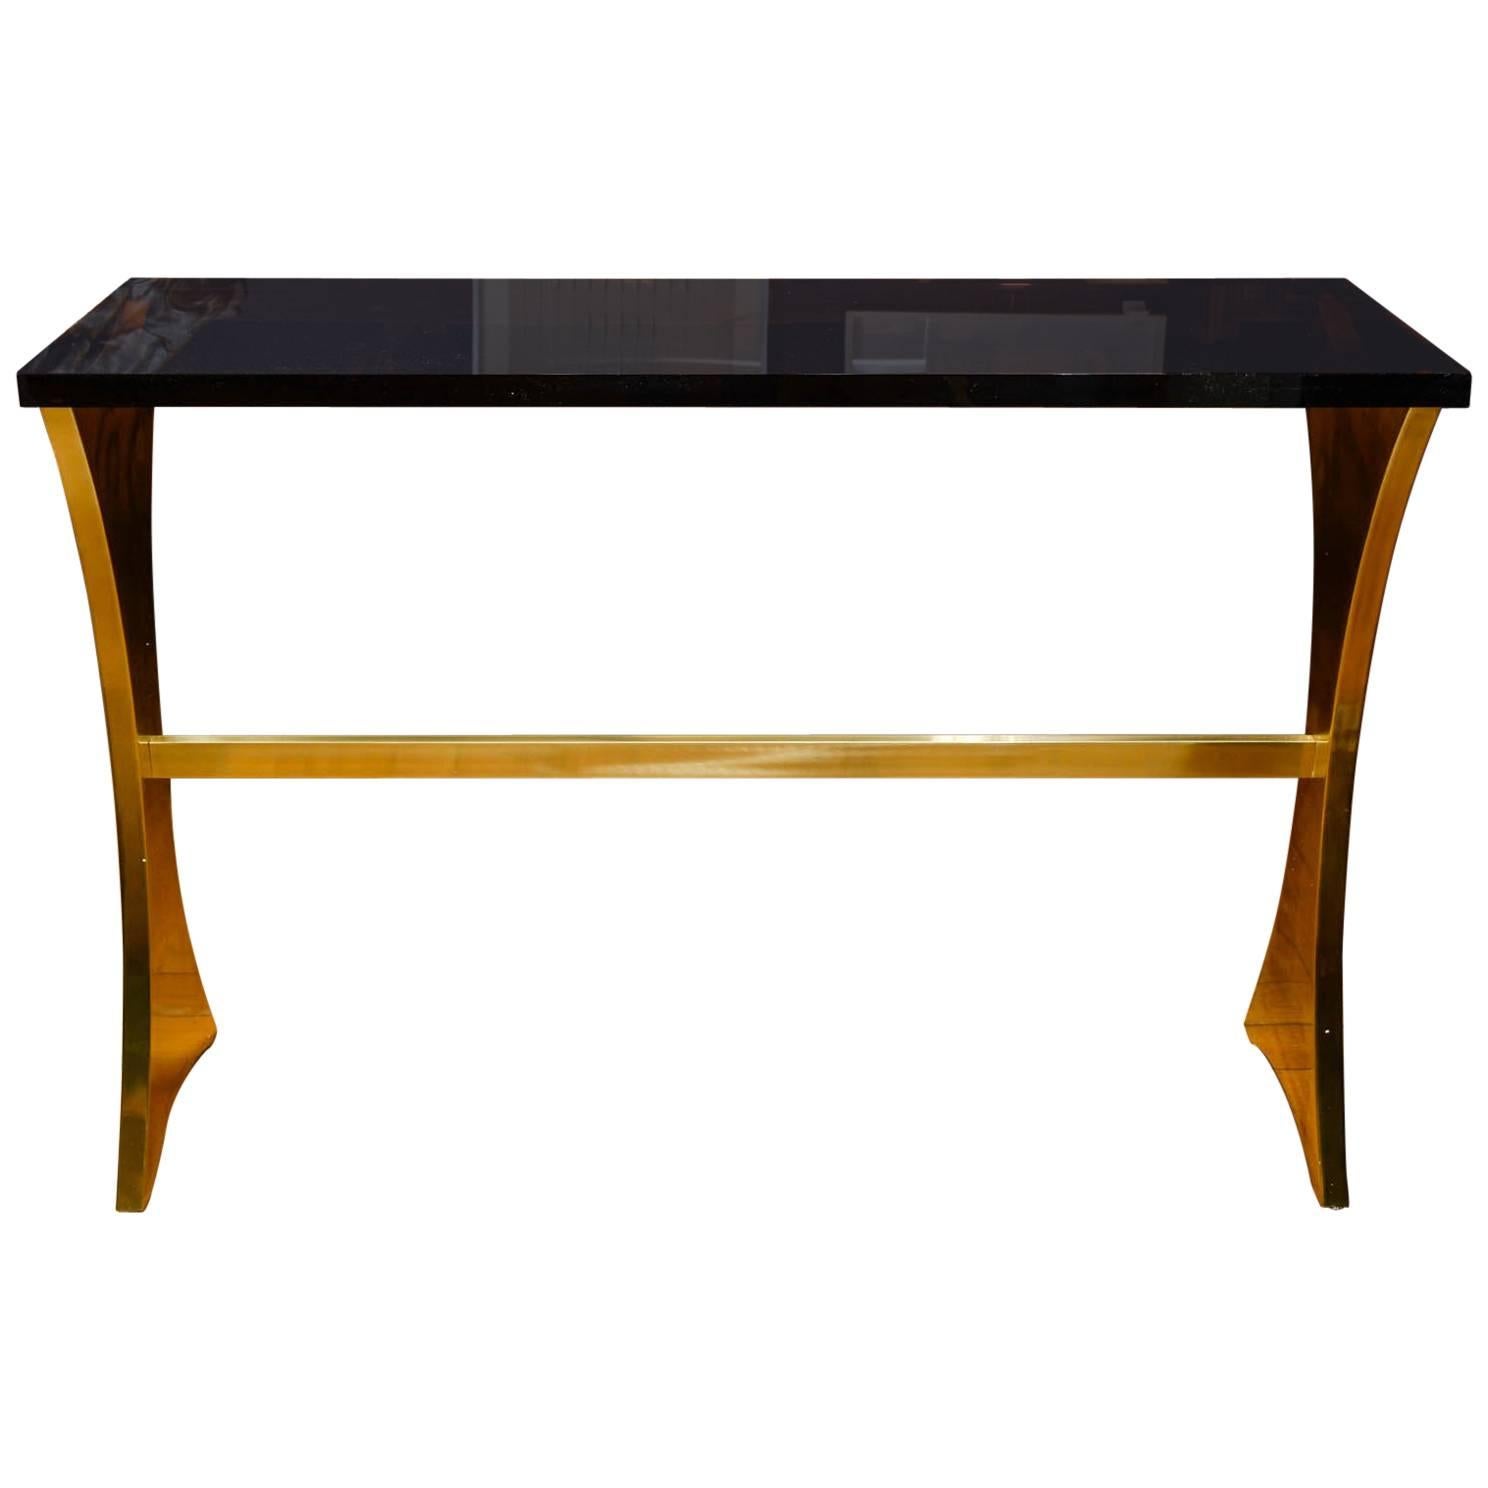 Brass and Resin Console at cost price